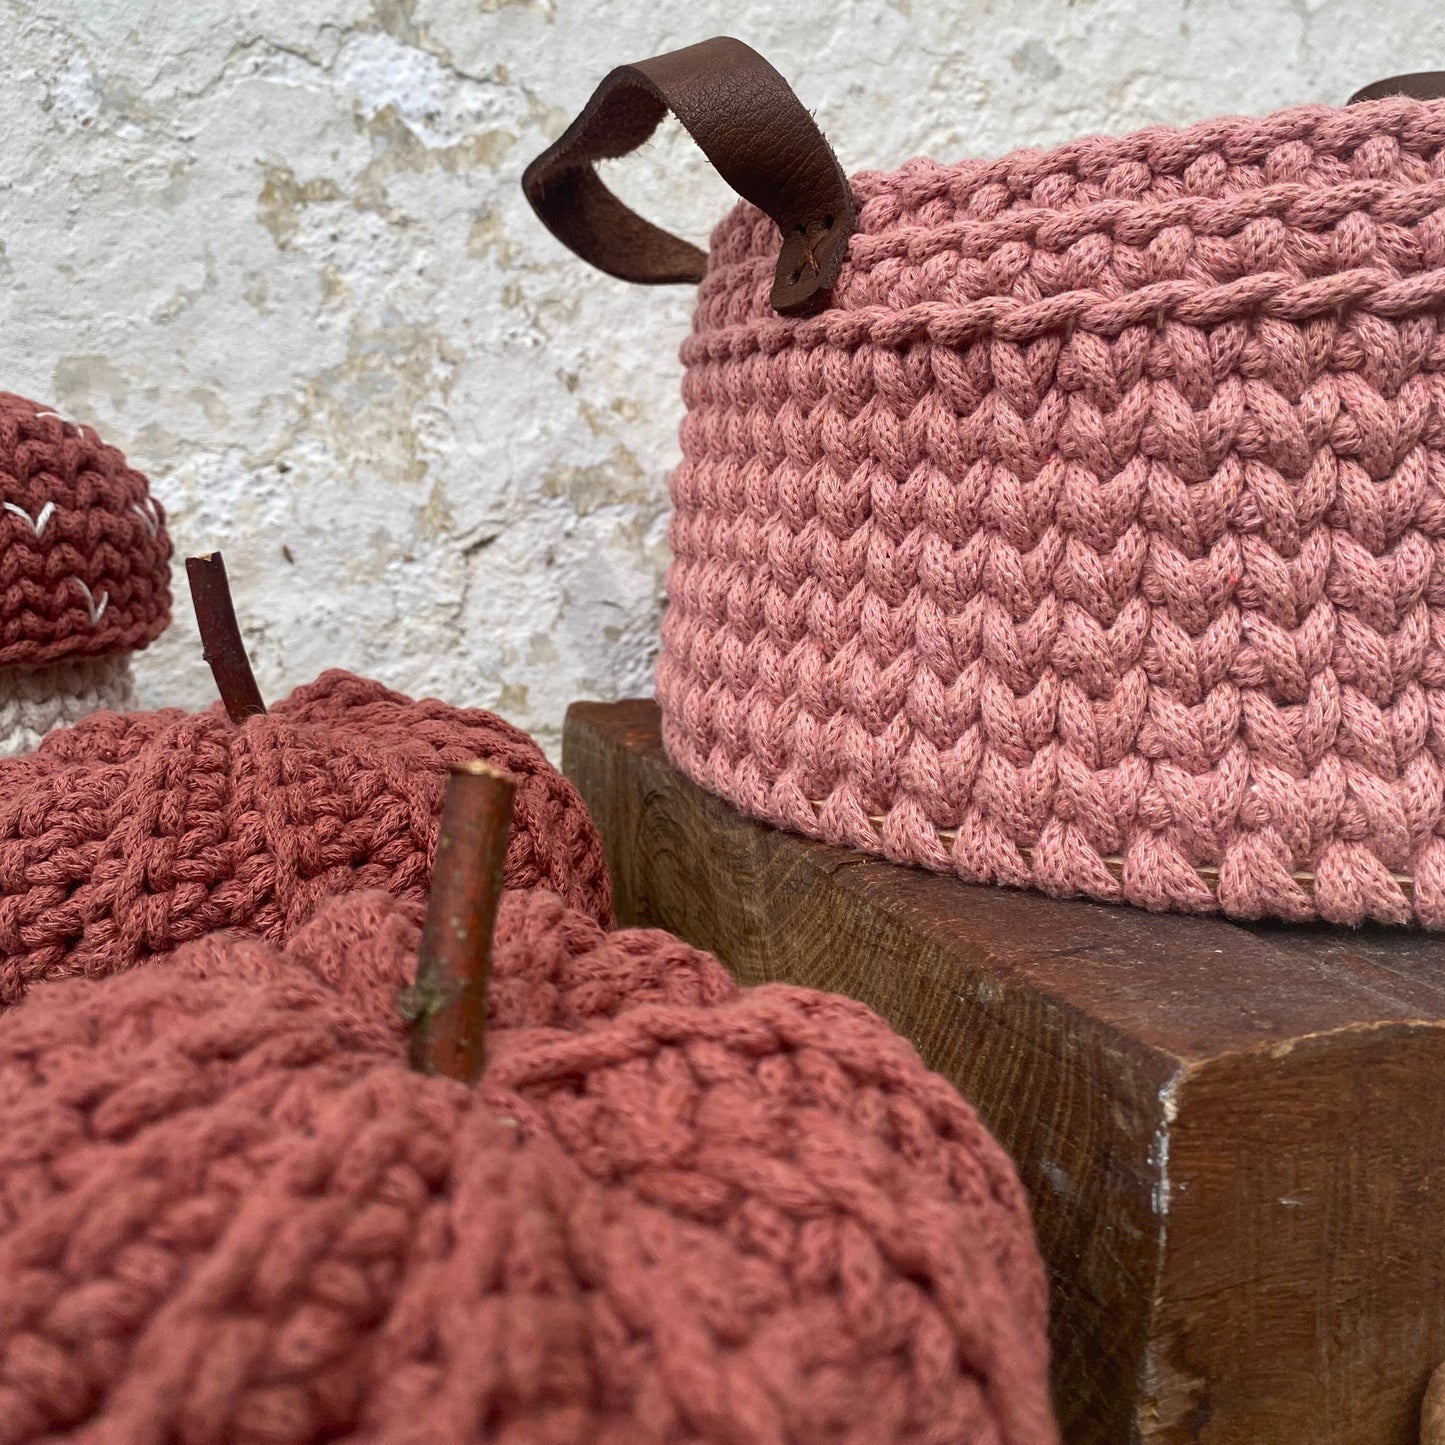 Vintage Pink Crochet Basket with Leather Handles - Recycled Pink Basket